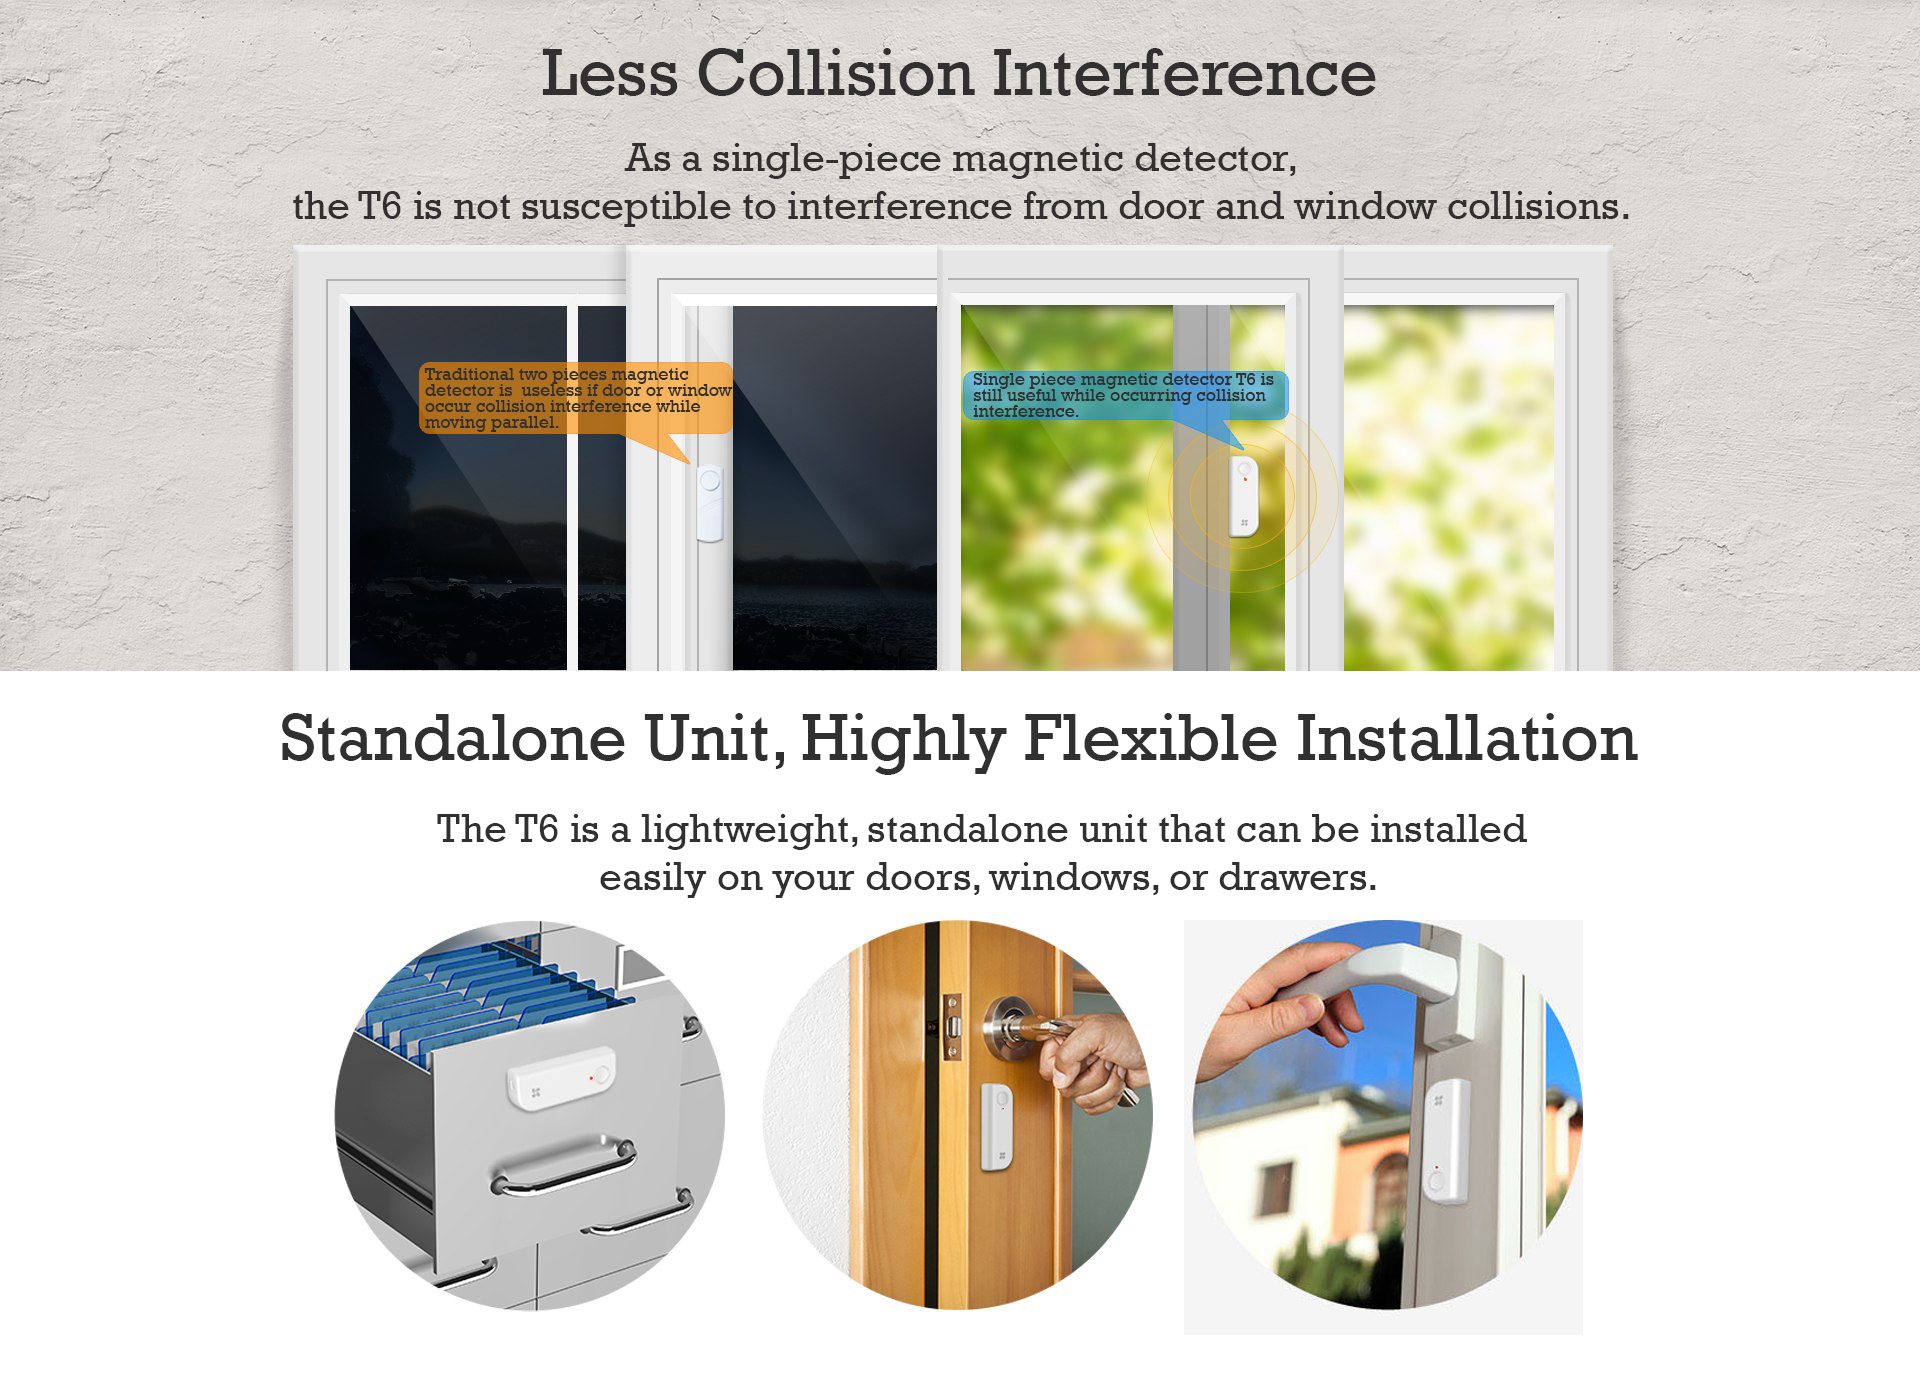 Less Collision Interference